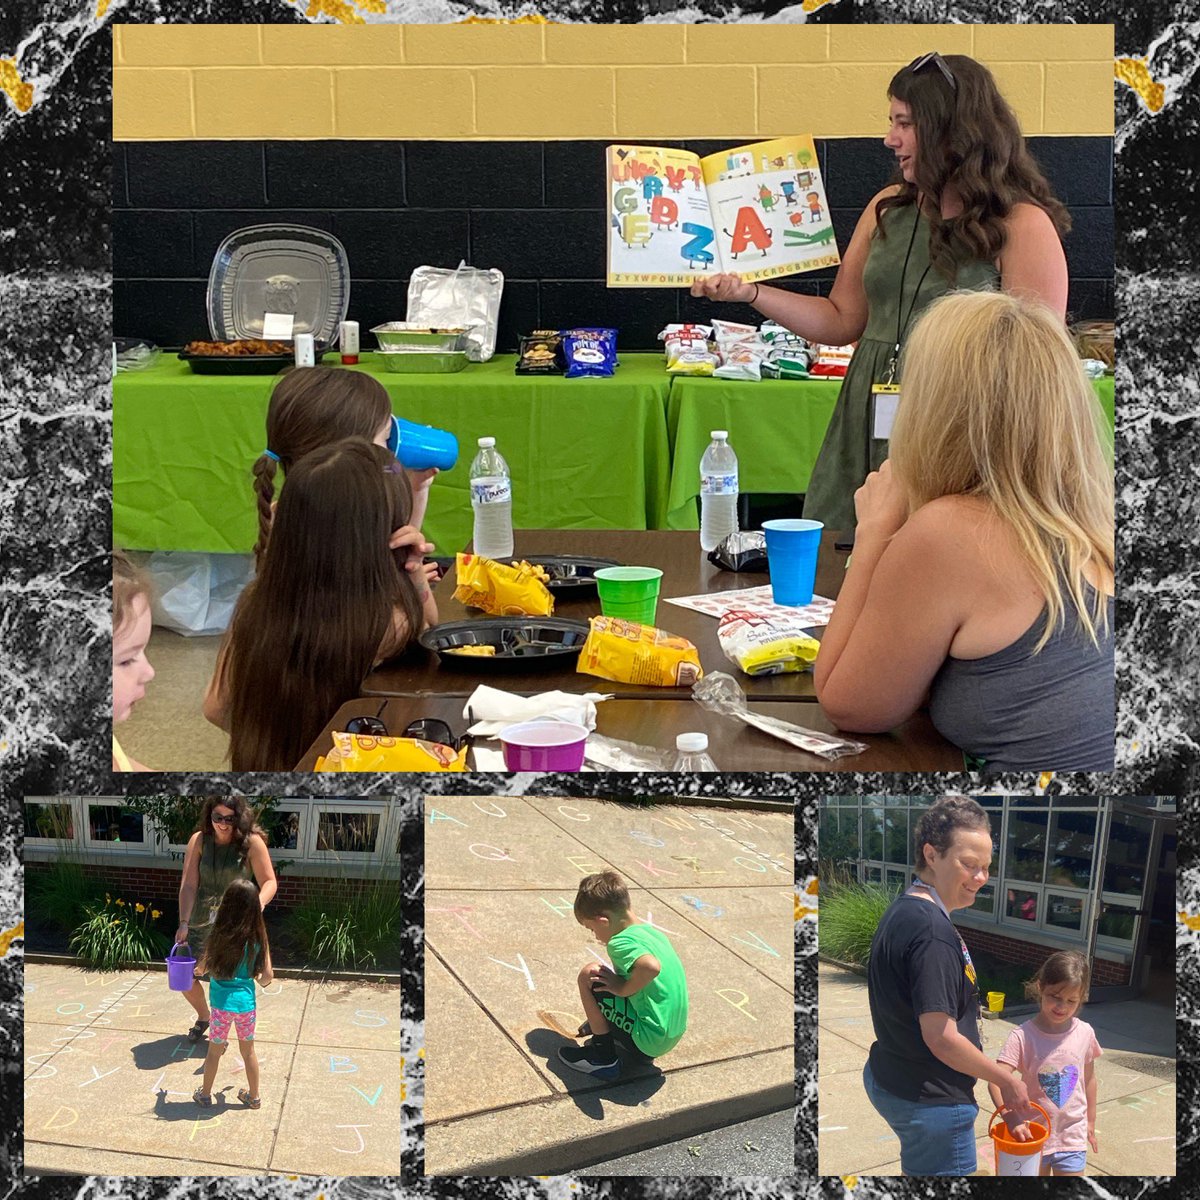 This afternoon, some QE kindergartners and their families gathered for lunch and alphabet fun! We look forward to seeing them and more kindergartners at our July and August events! #QvillePride #inspiring #connecting